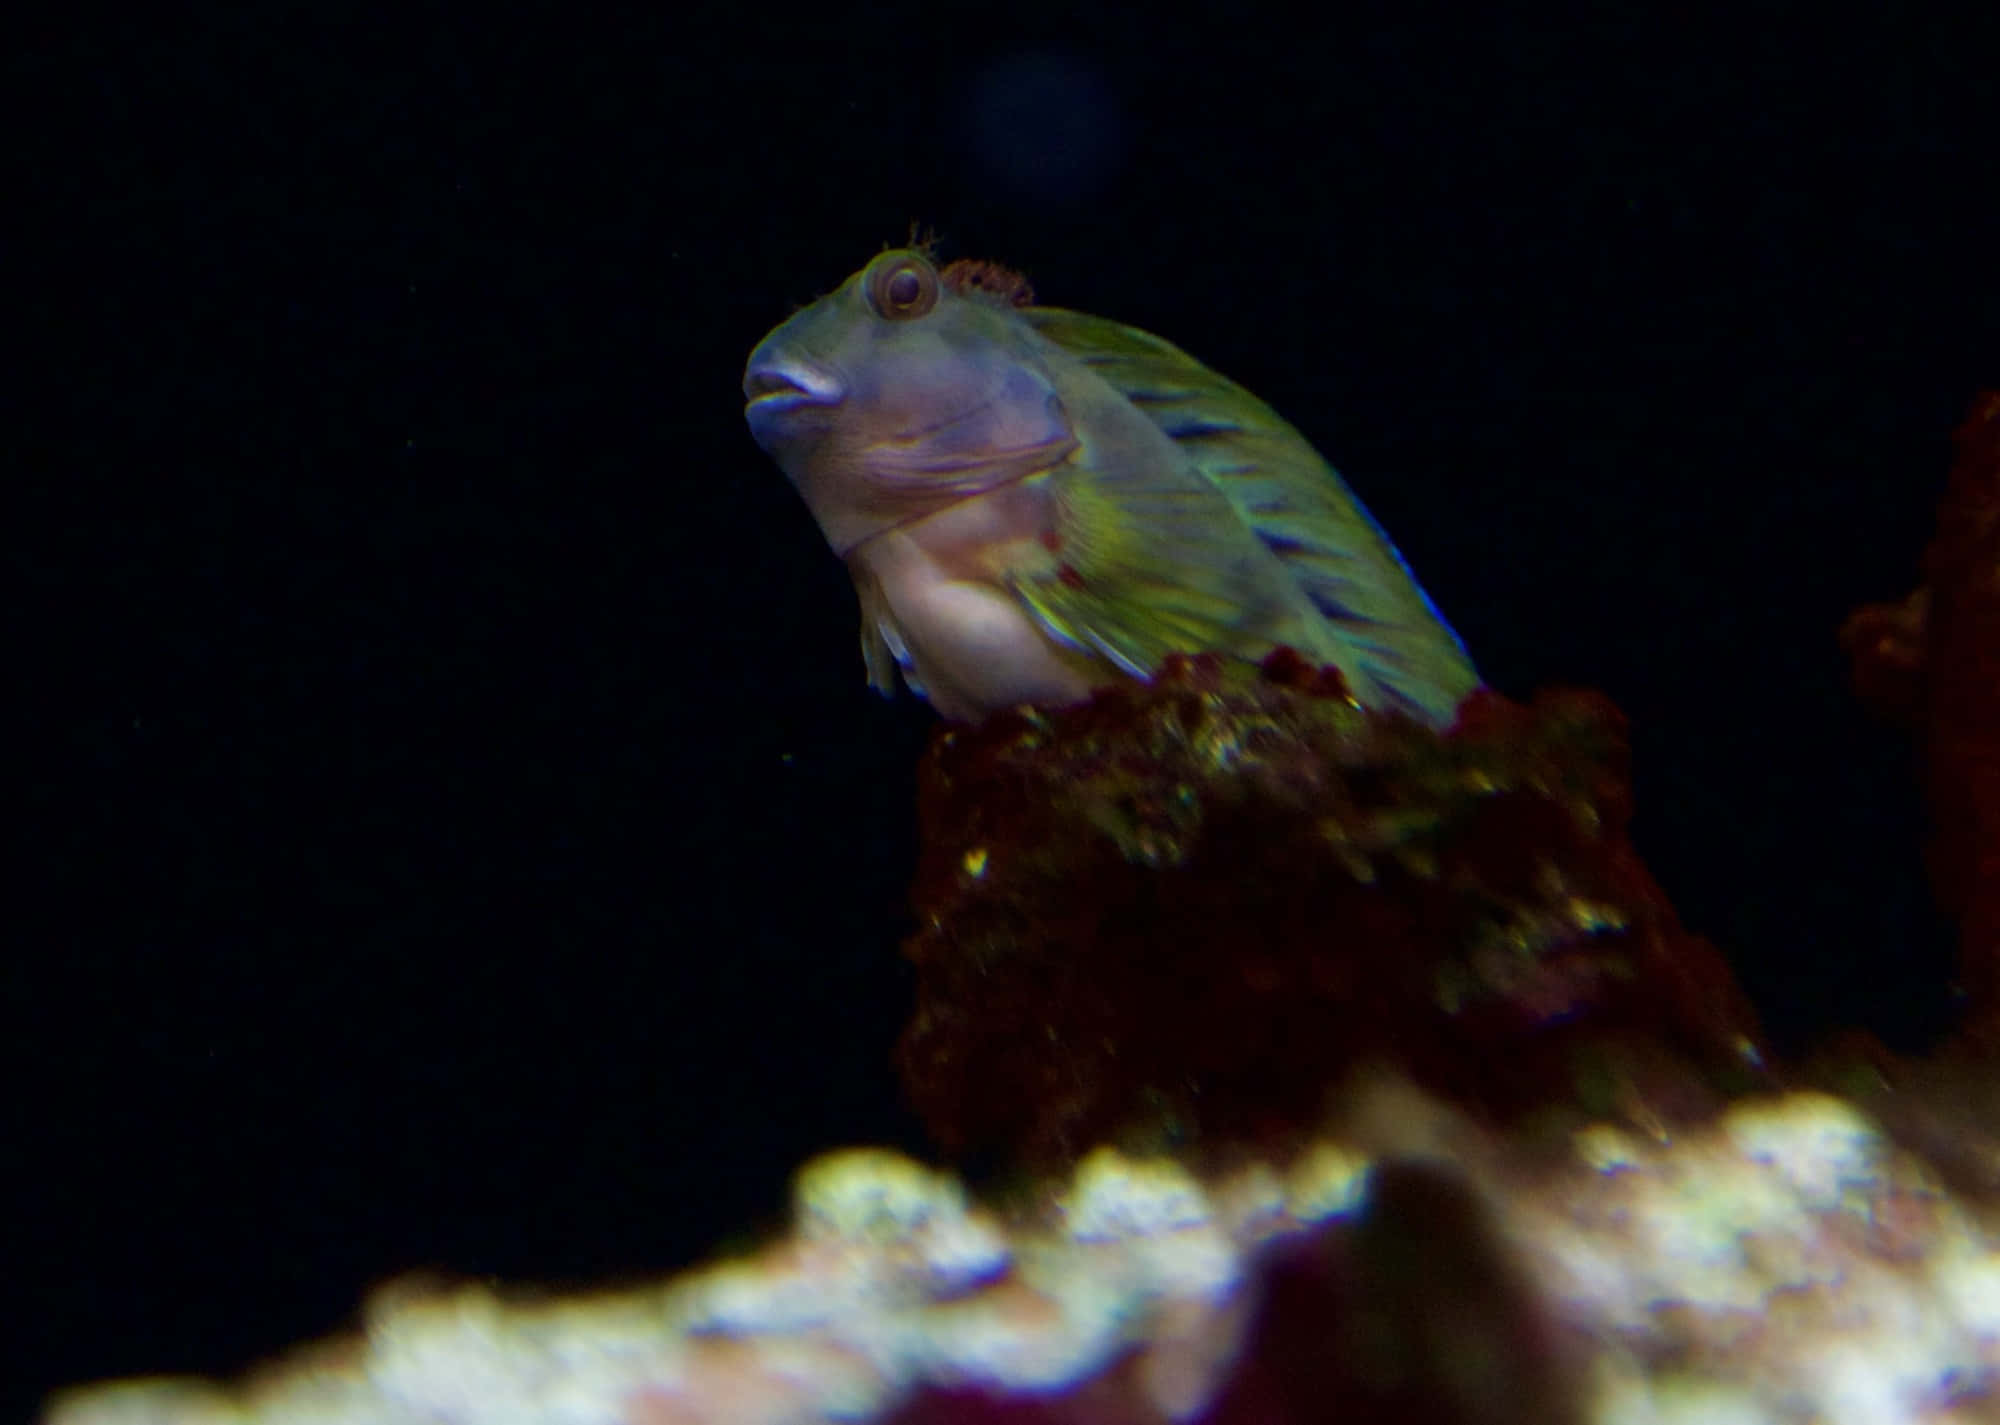 A Vibrant Blenny Fish Exploring The Colorful Underwater World. Wallpaper